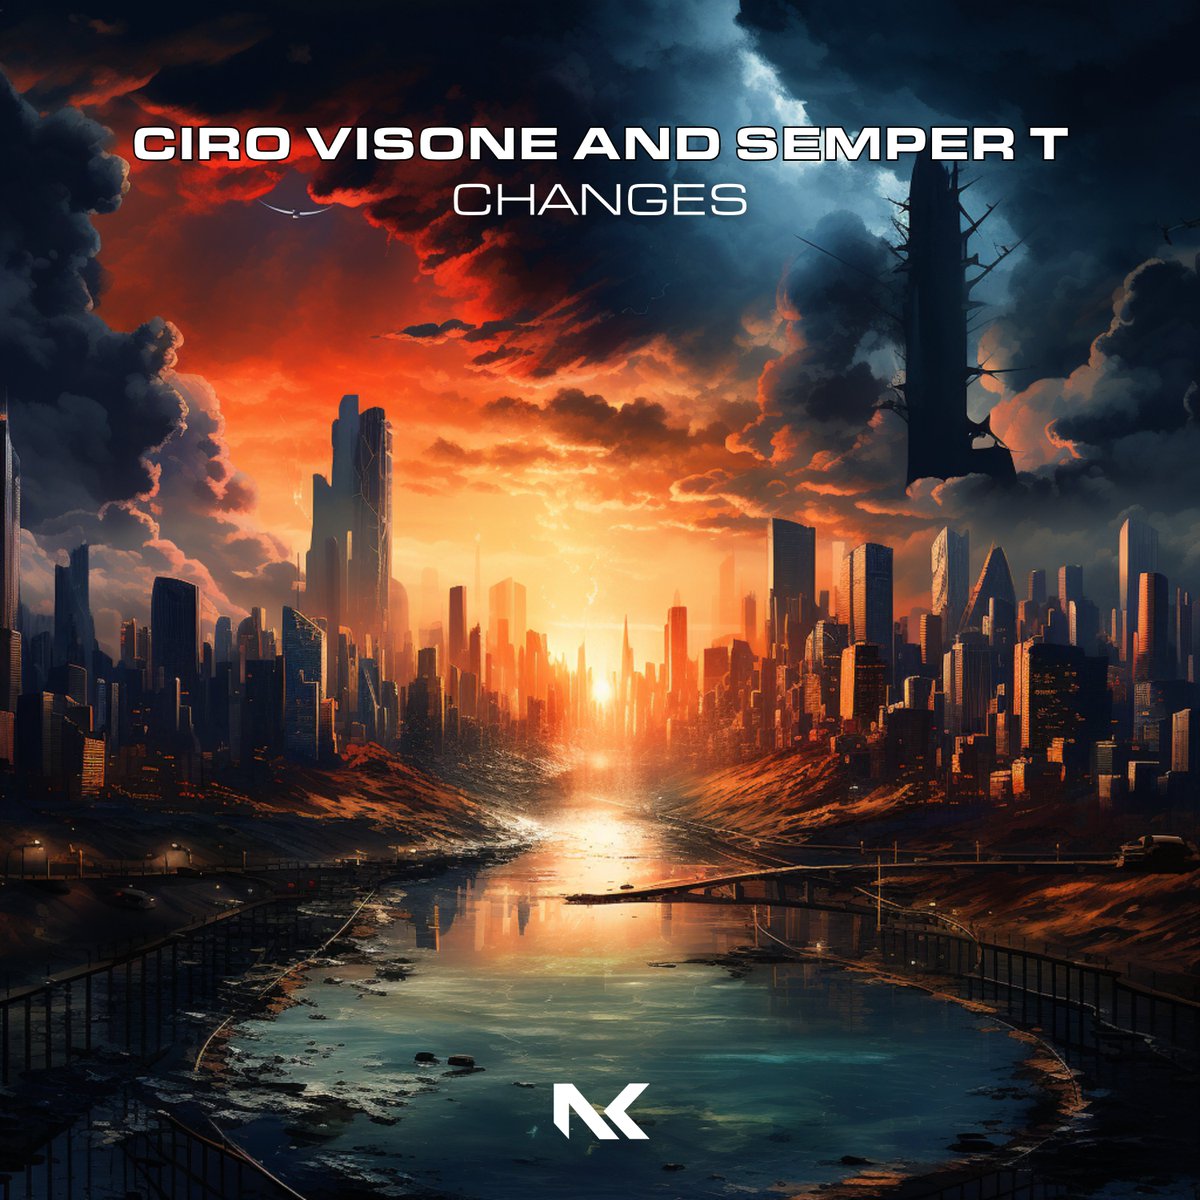 Get ready for a double dose of trance magic on March 8th on @NKMus_Official! 'Changes' by Ciro Visone & Semper T promises a sonic evolution, while Jackob Roenald's 'Voices Behind' enchants with a mesmerizing soundscape. Presave now for front-row access! 🌟🌌